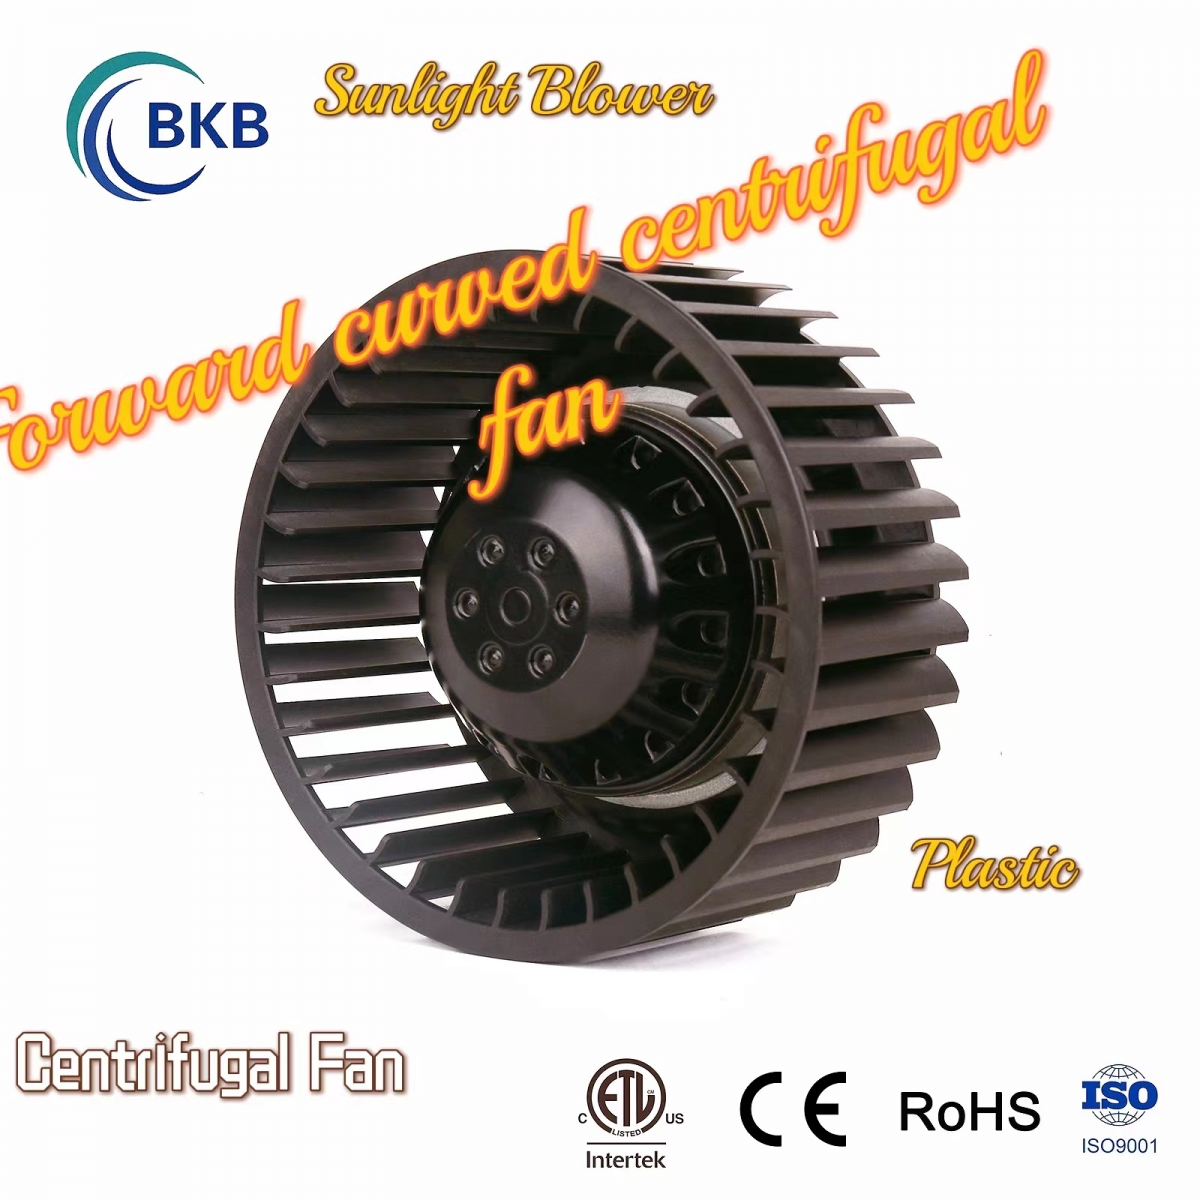 INLINE DUCT FAN CENTRIFUGAL FAN SERVES THE WAREHOUSING ,CHEMICAL MANUFACTURING ,NUTRACEUTICAL AND PHARMACEUTICAL INDUSTRIAL .-SUNLIGHT BLOWER,Centrifugal Fans, Inline Fans,Motors,Backward curved centrifugal fans ,Forward curved centrifugal fans ,inlet fans, EC fans